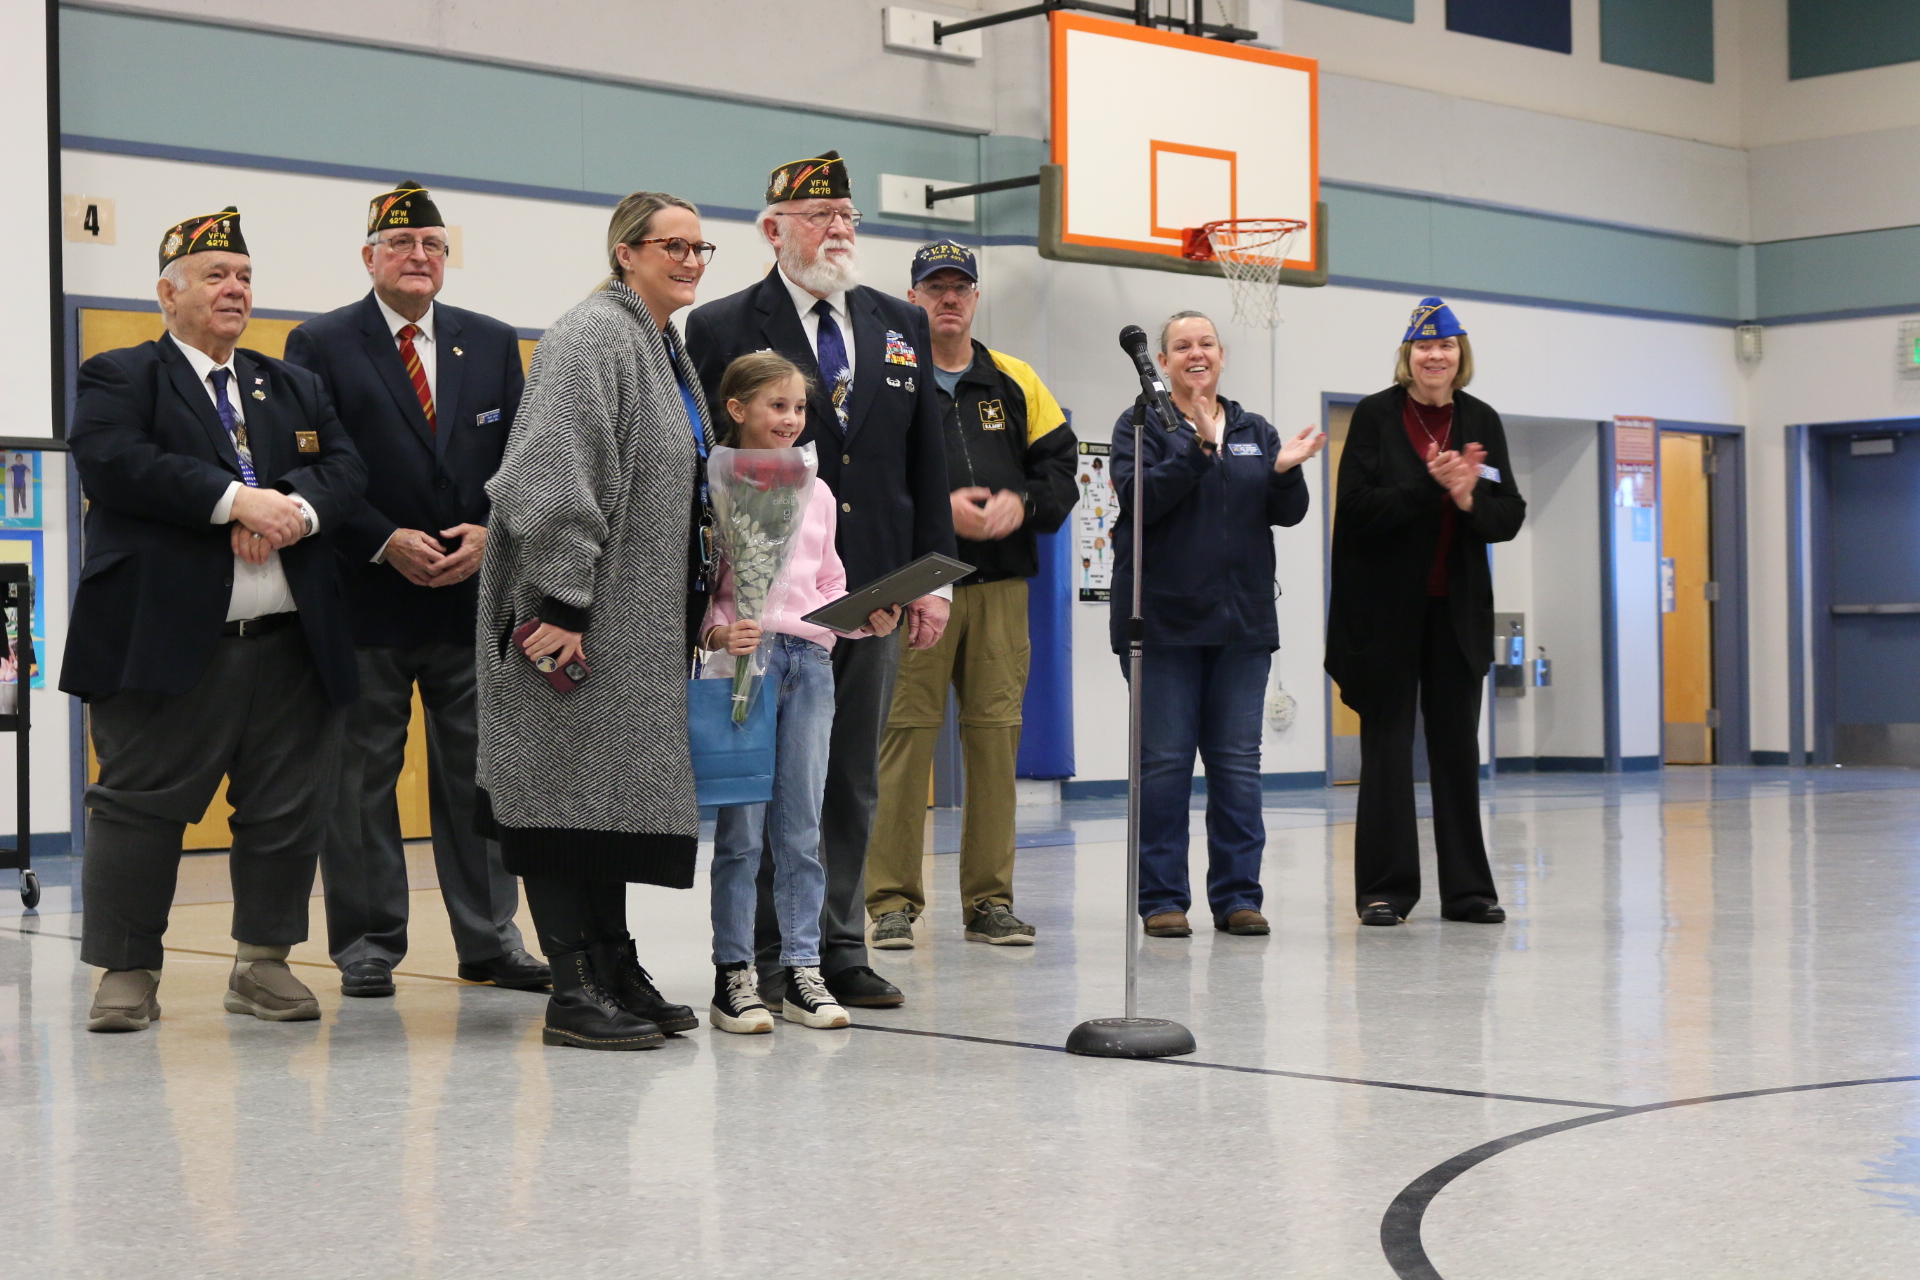 Gause student honored by uniformed Veterans of Foreign Wars with flowers and a certificate